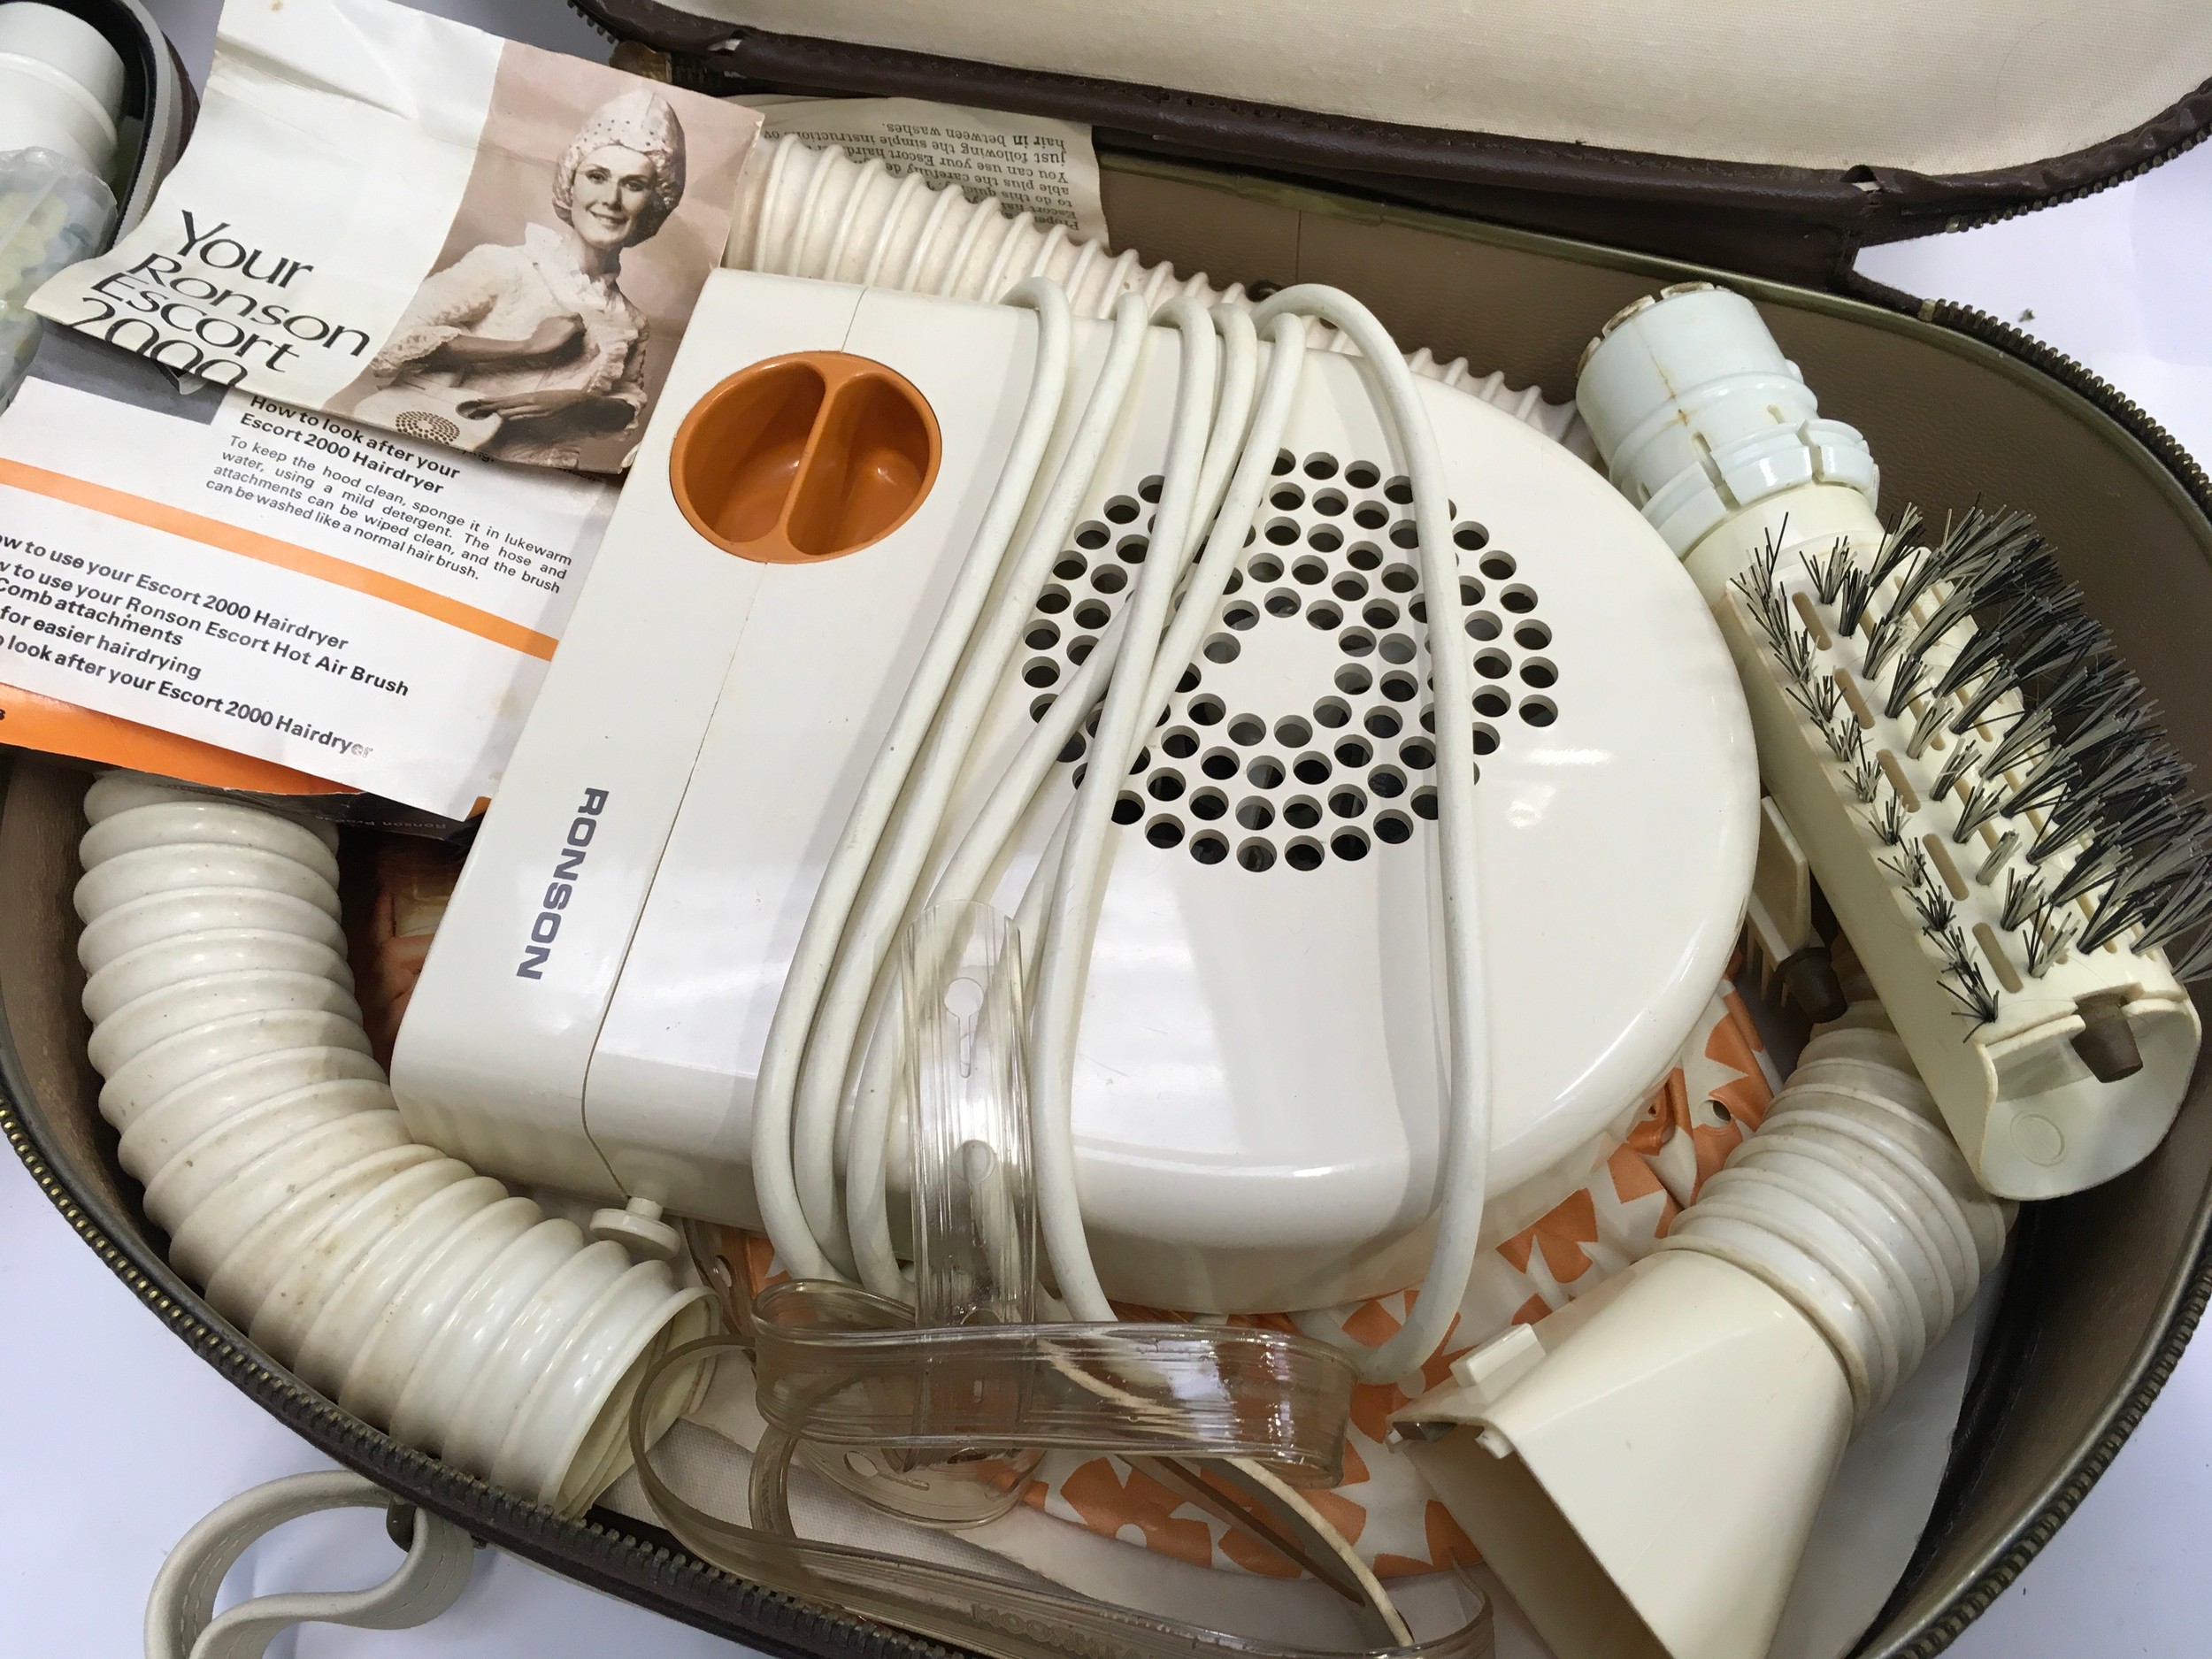 Two vintage 1970's Ronson Escort 2000 hairdryers both cased one with outer box (2). - Image 3 of 4